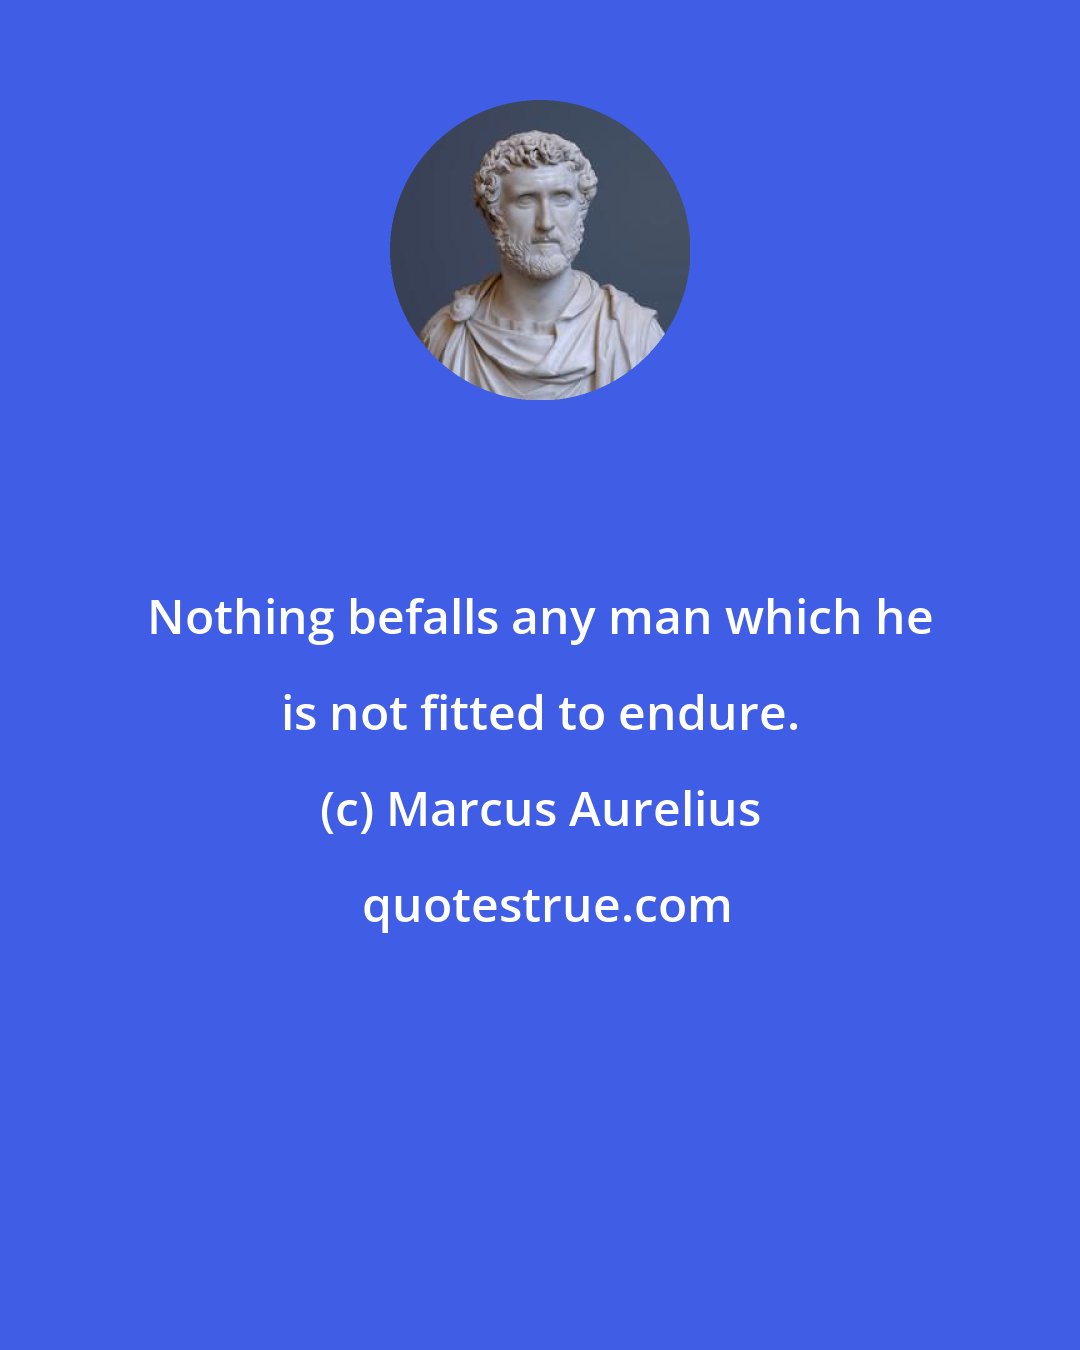 Marcus Aurelius: Nothing befalls any man which he is not fitted to endure.